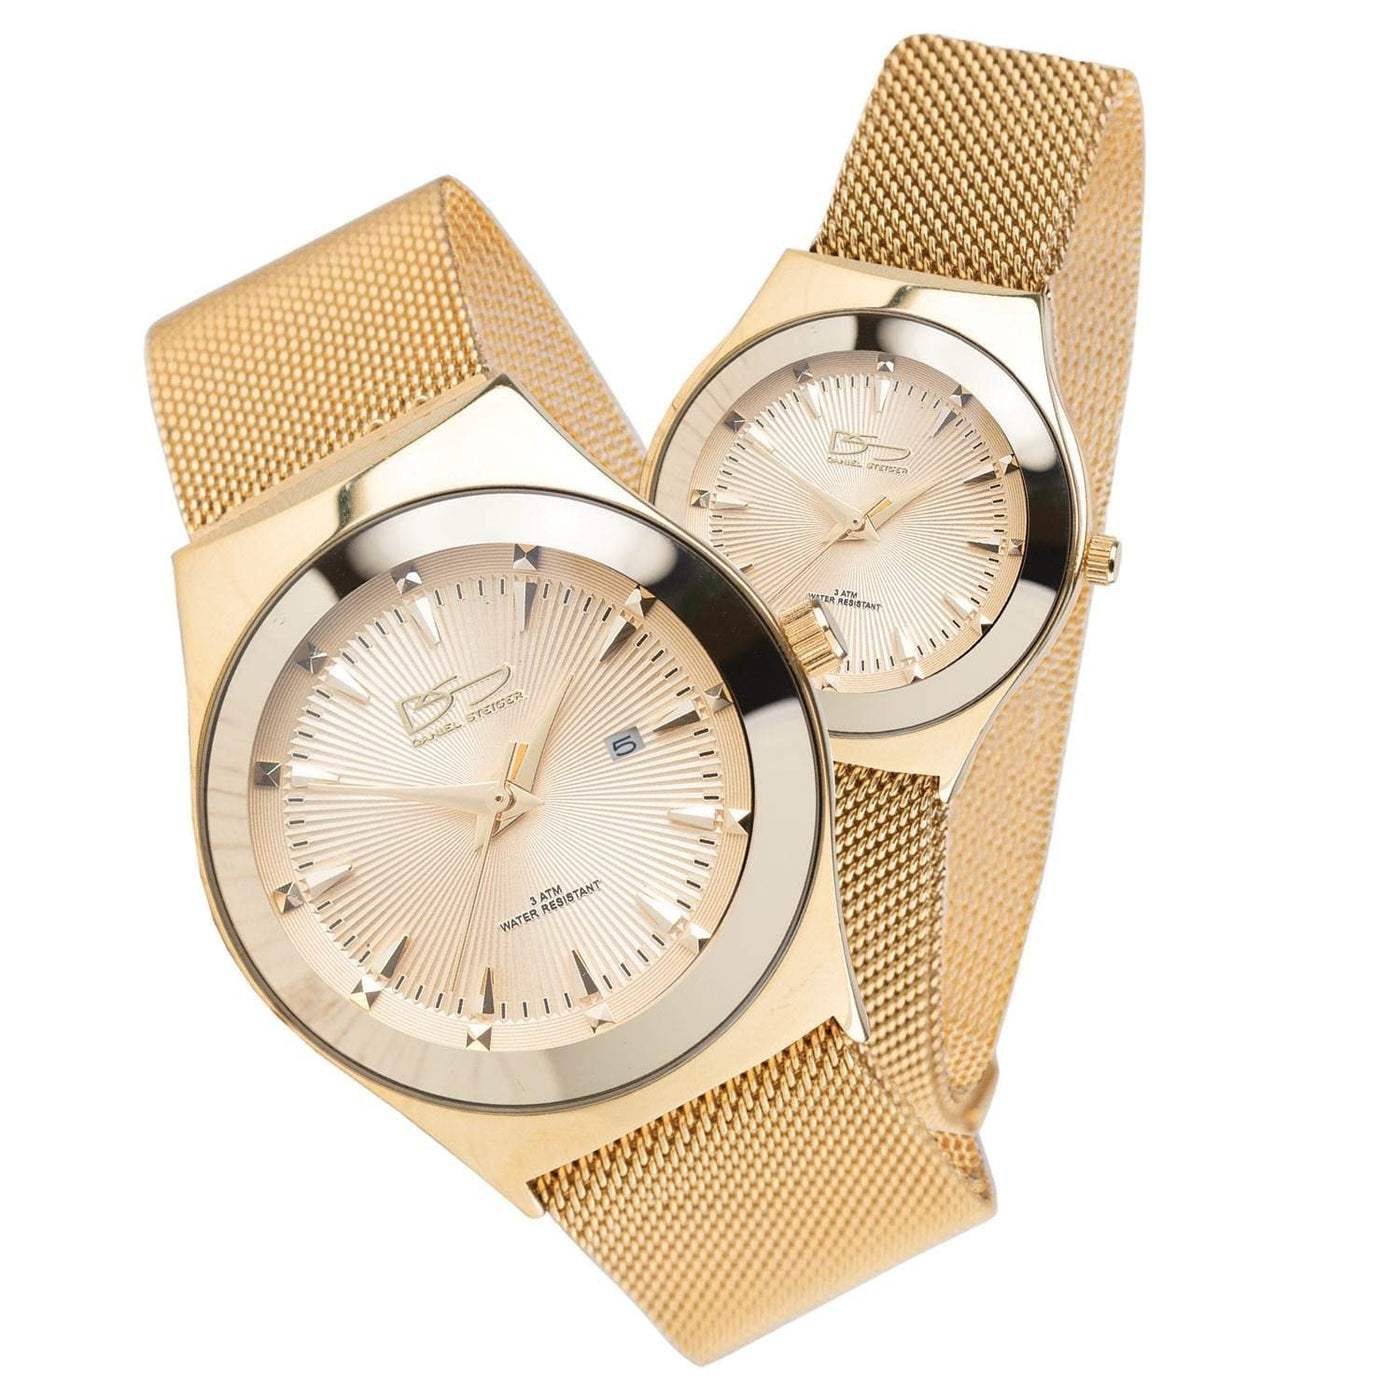 Daniel Steiger Rondo Milanese Magnetic Watches - Set Of 2